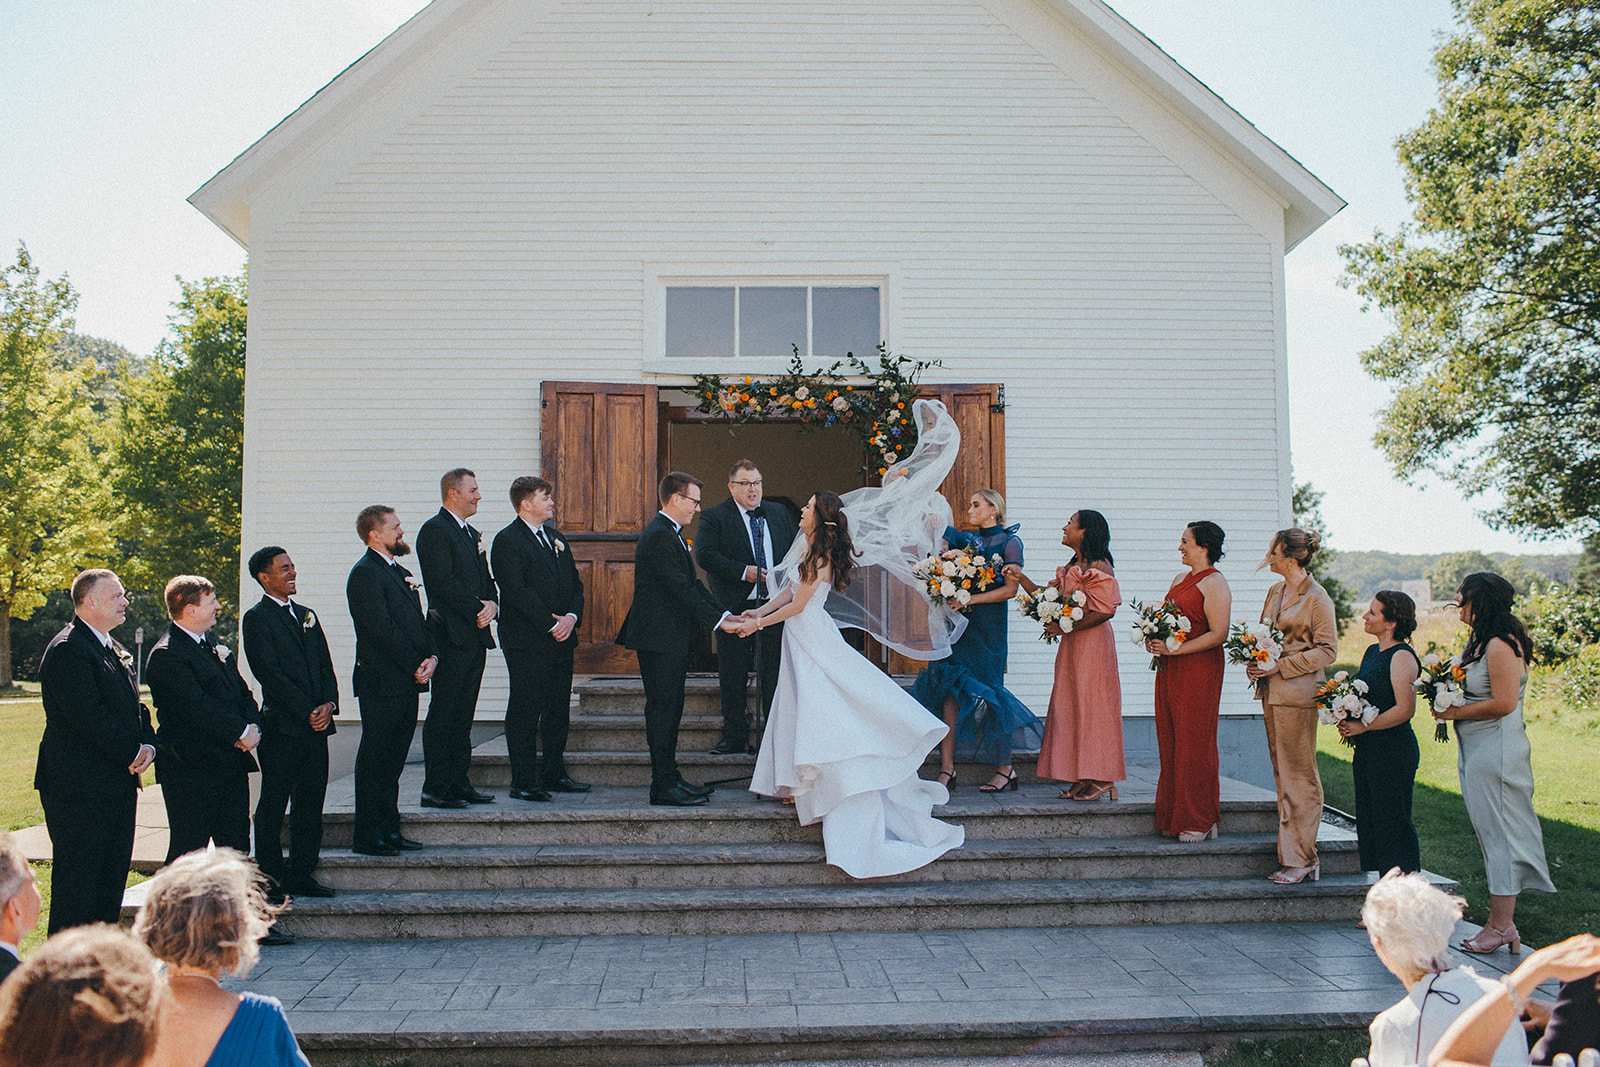 A bride and groom get married on the front steps of a little white chapel at the Felt Estate in Saugatuck, Michigan